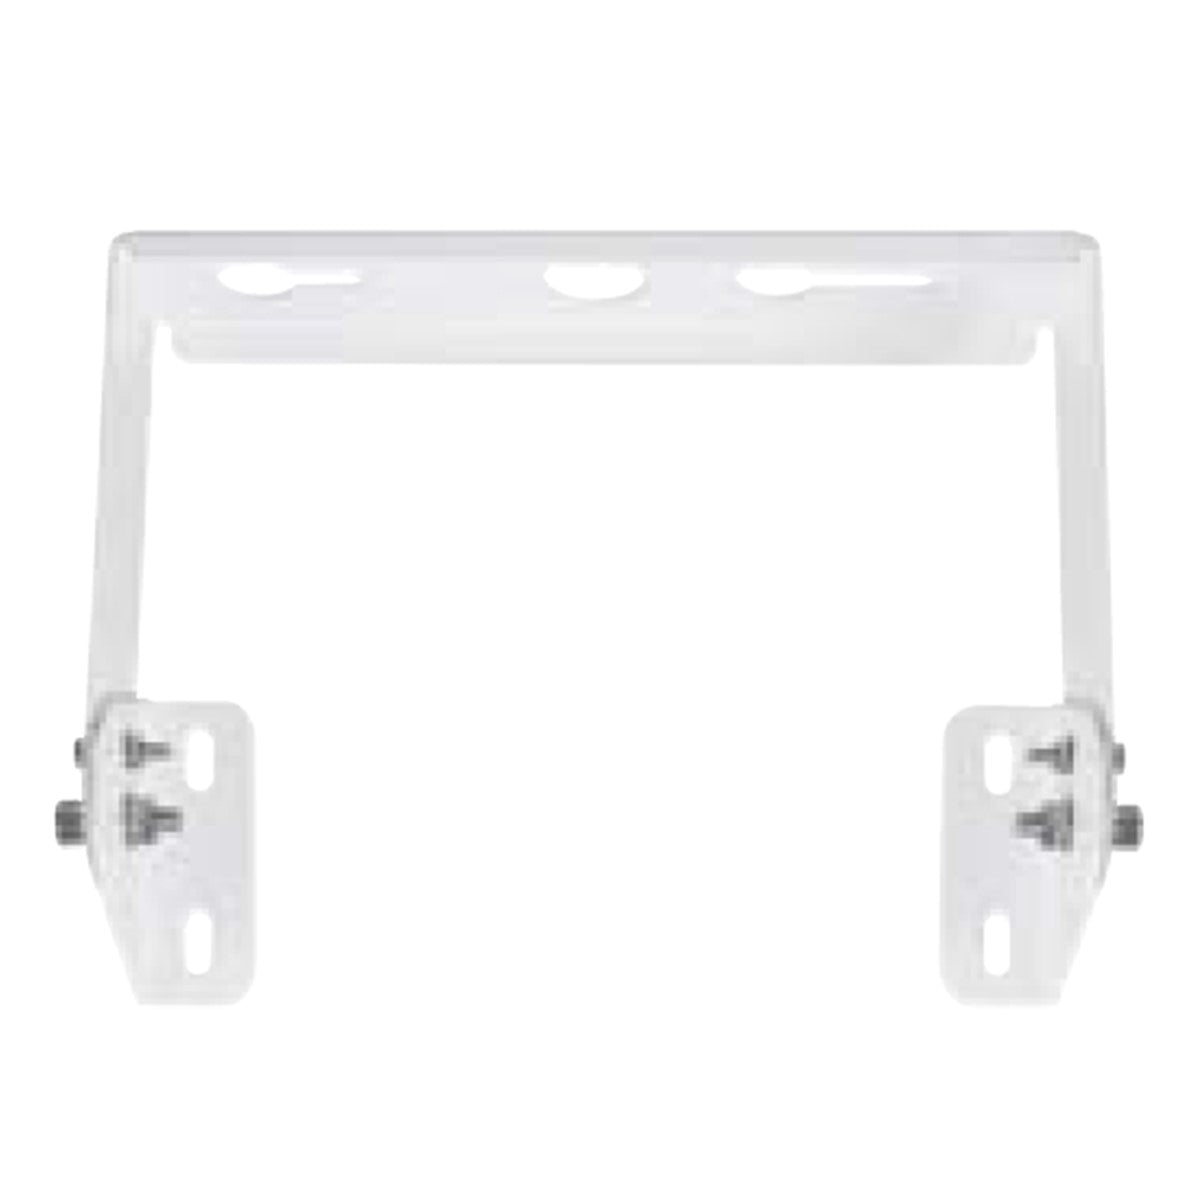 White Surface/Pendant Mount Bracket, For 200-240W High Bays